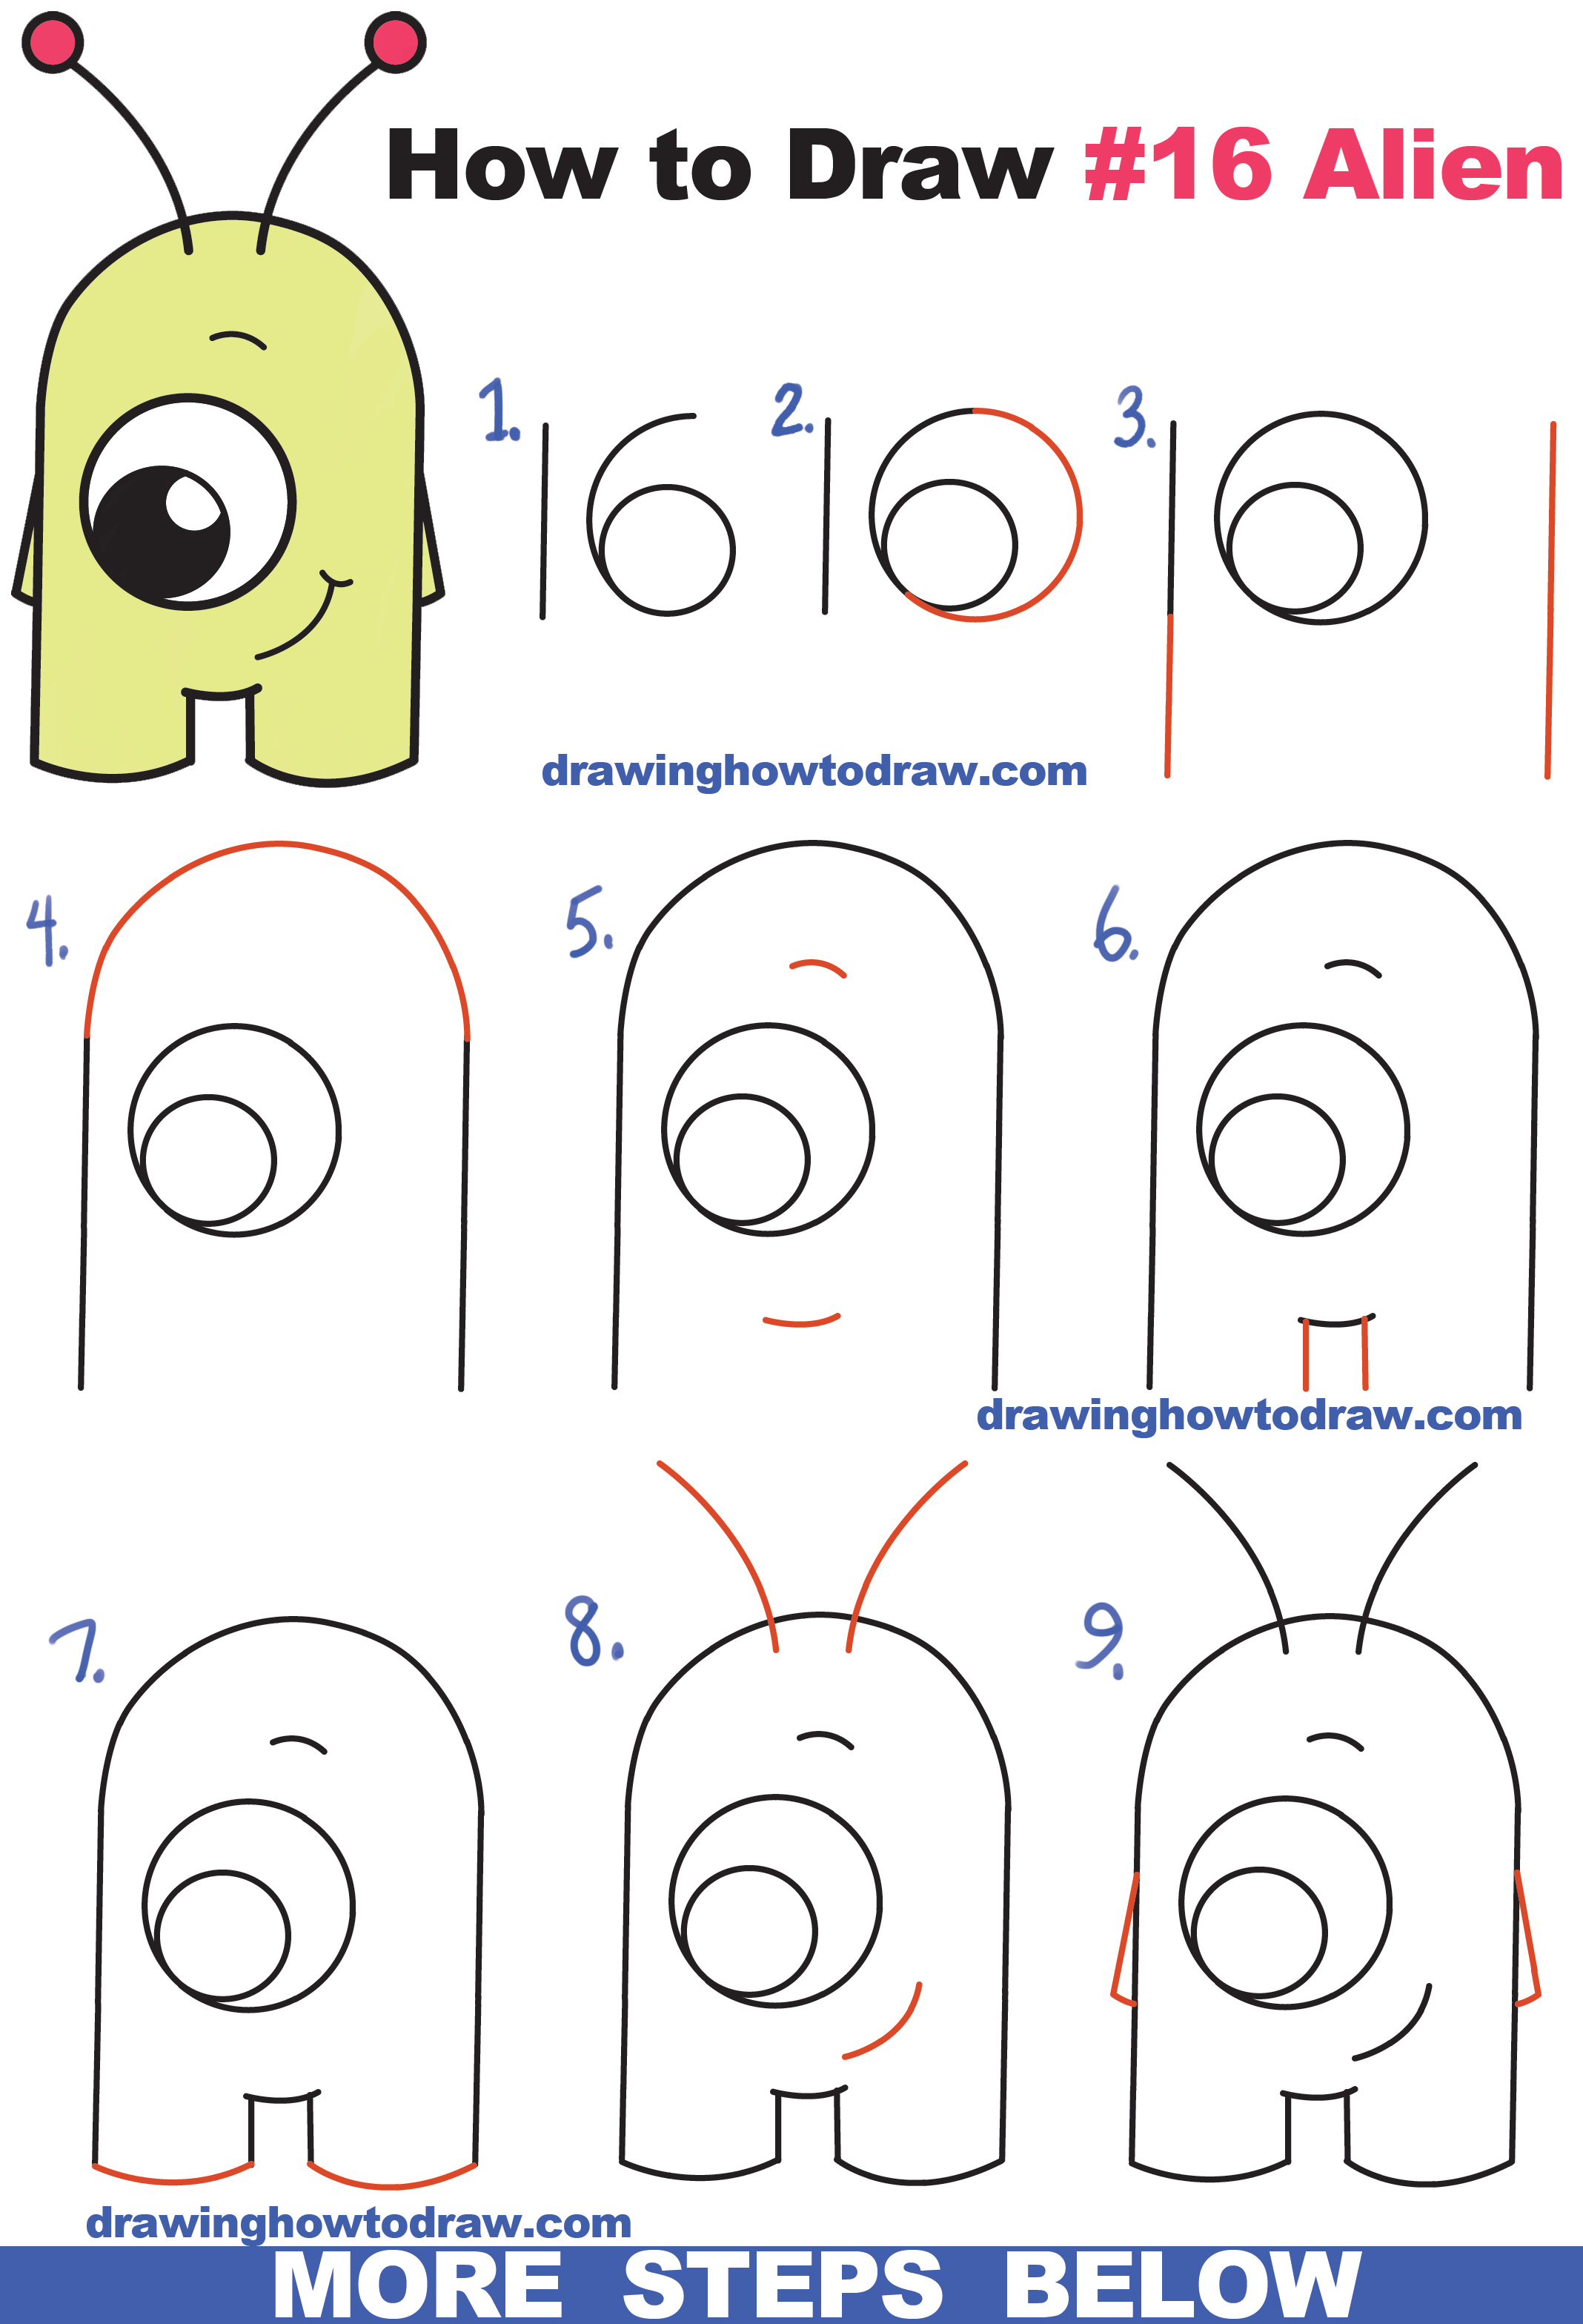 How to Draw Cute Cartoon Alien from Numbers "16" Easy Step by Step